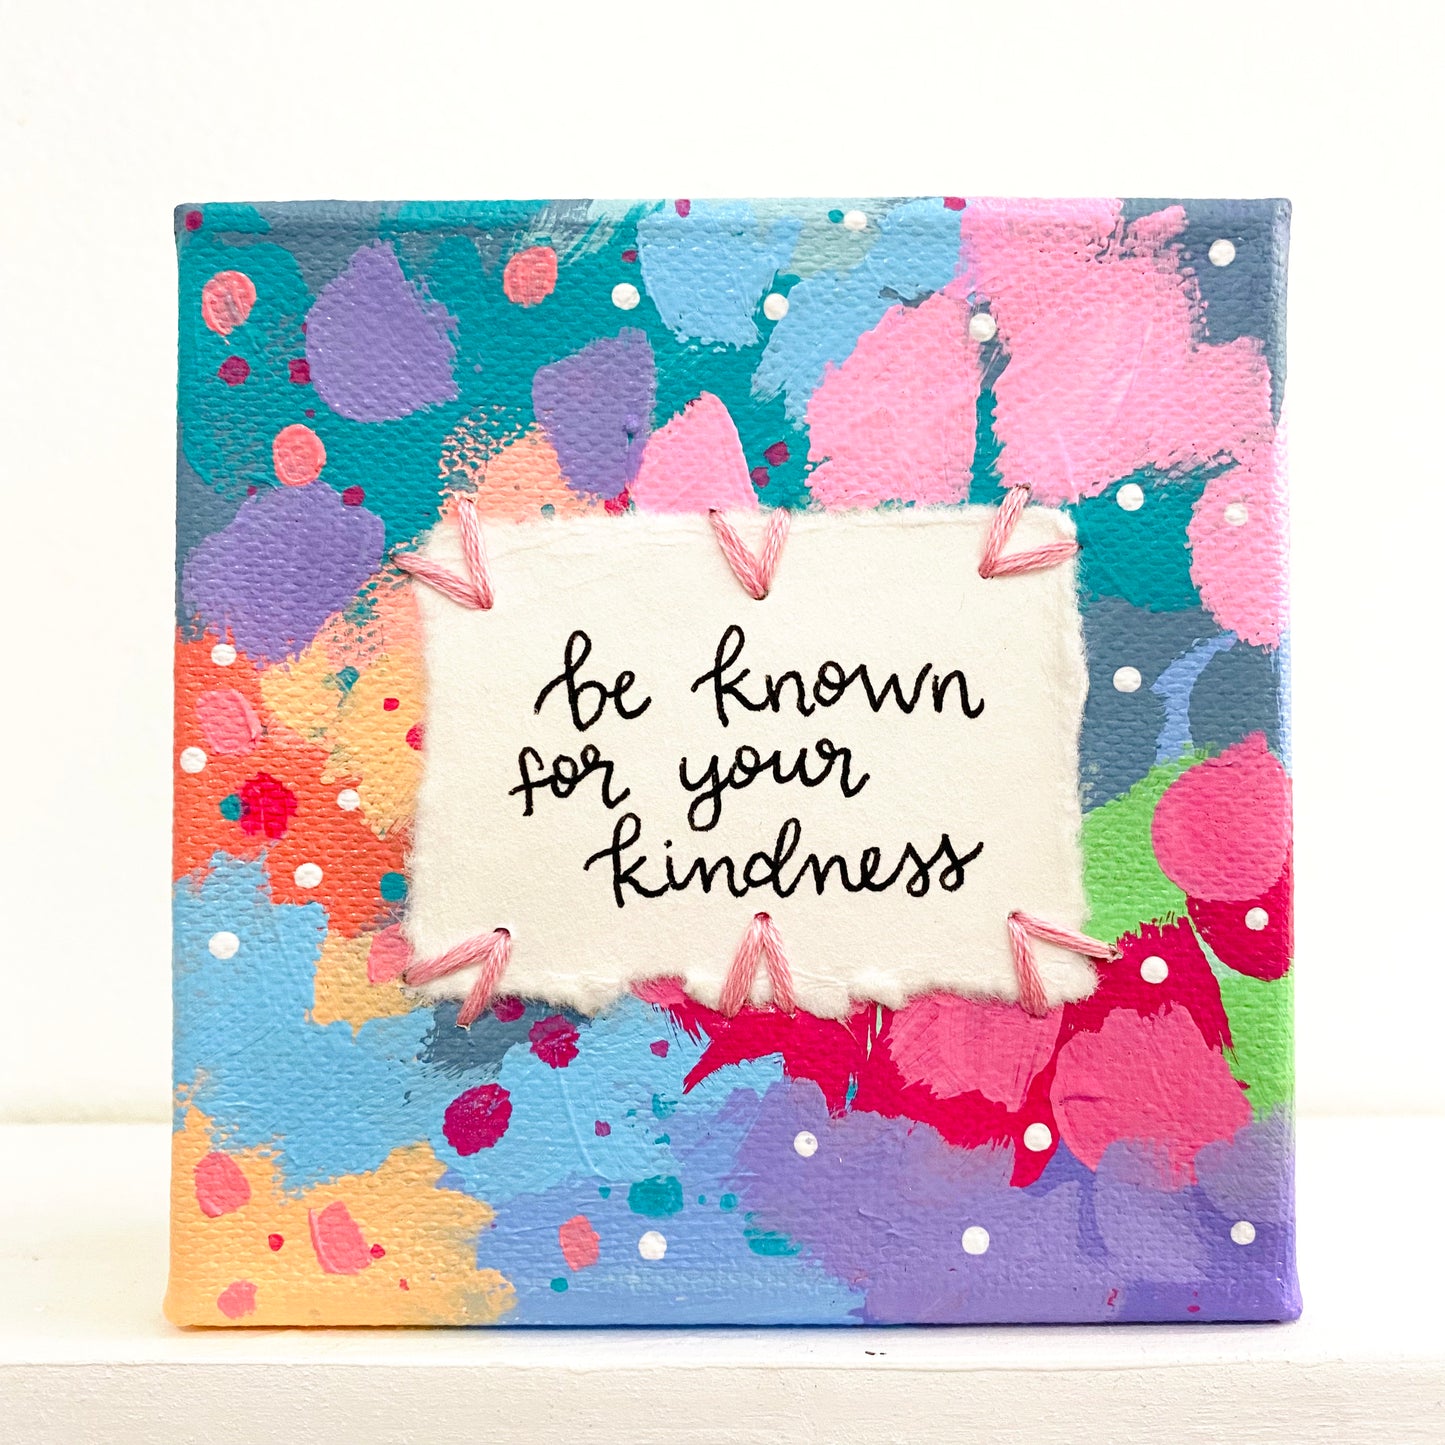 Be Known For Your Kindness 4x4 inch original abstract canvas with embroidery thread accents